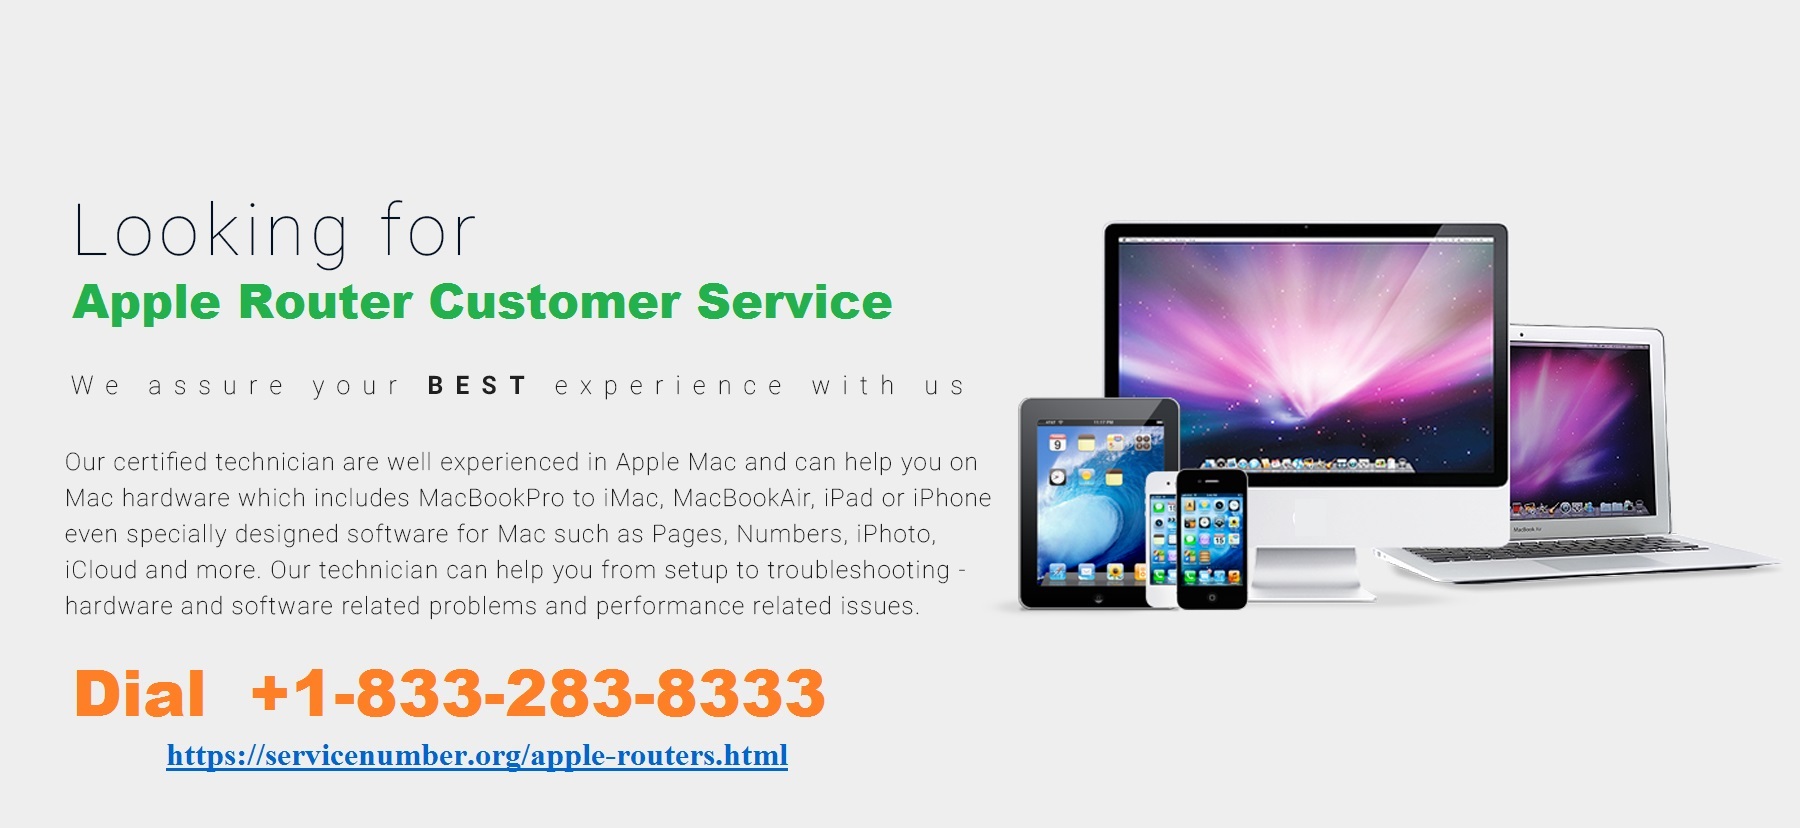 Apple Router Service 1-833-283-8333